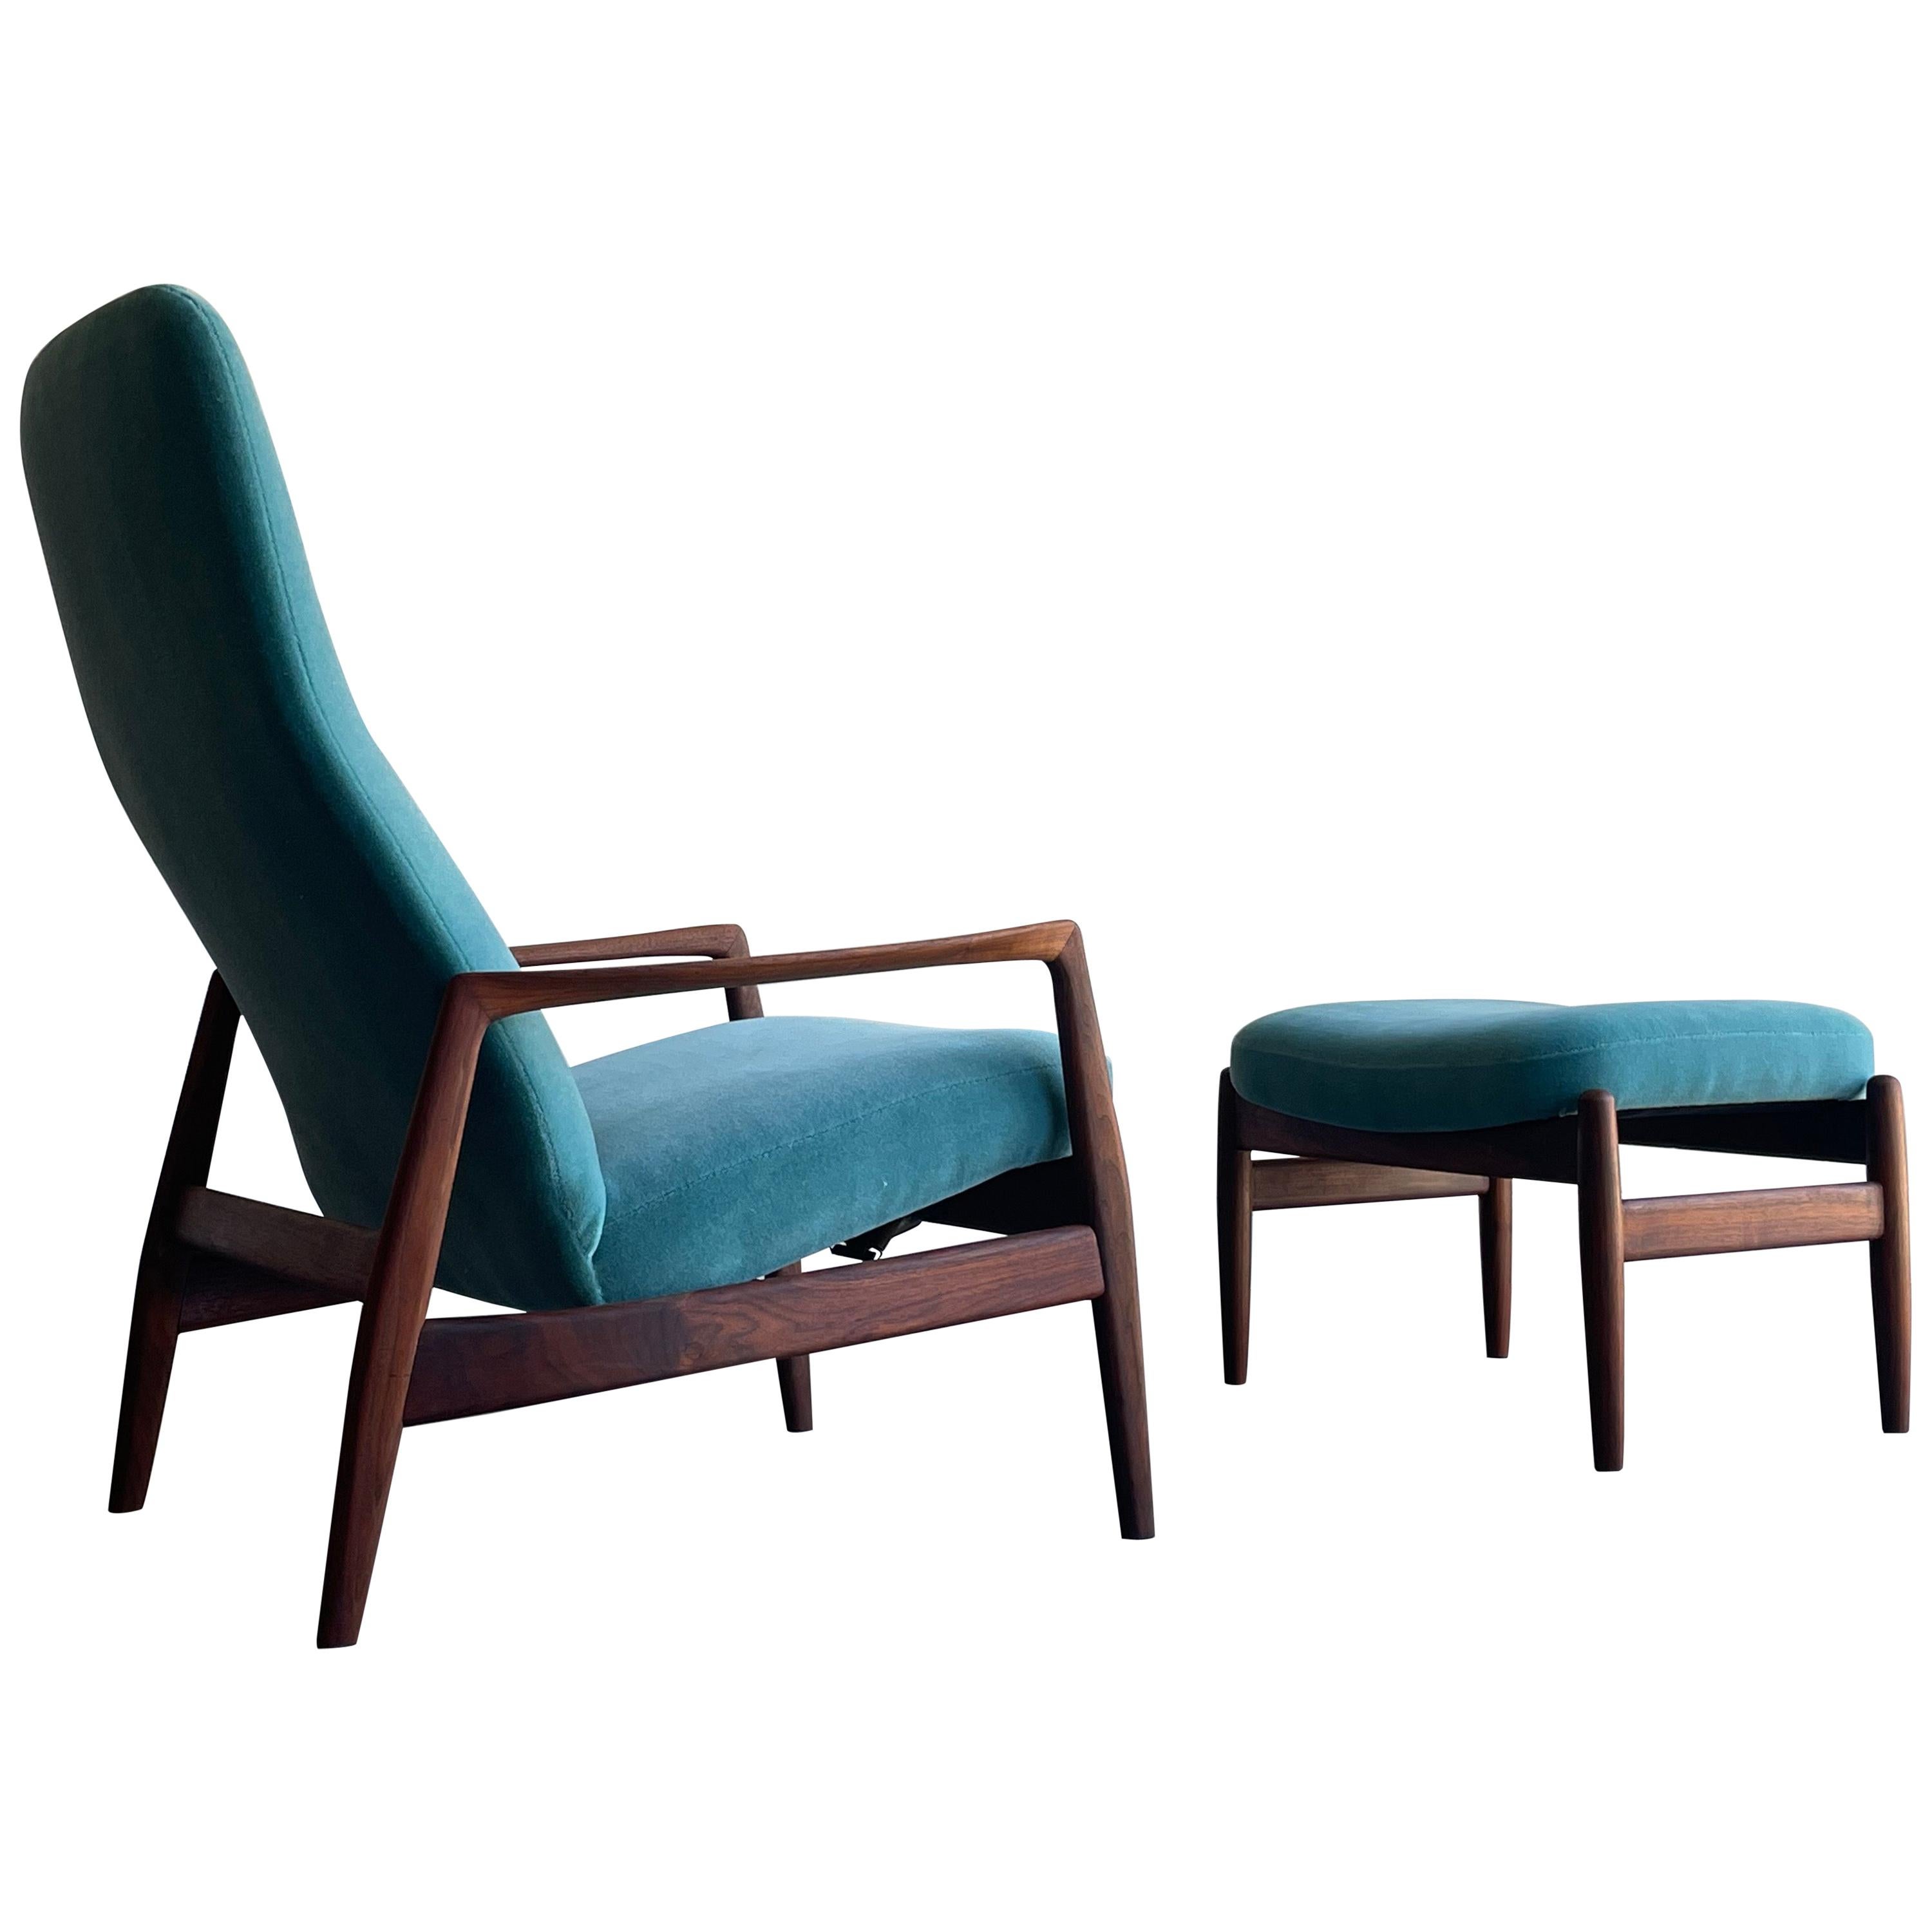 Folke Ohlsson Lounge Chair and Ottoman for DUX, Walnut and Mohair